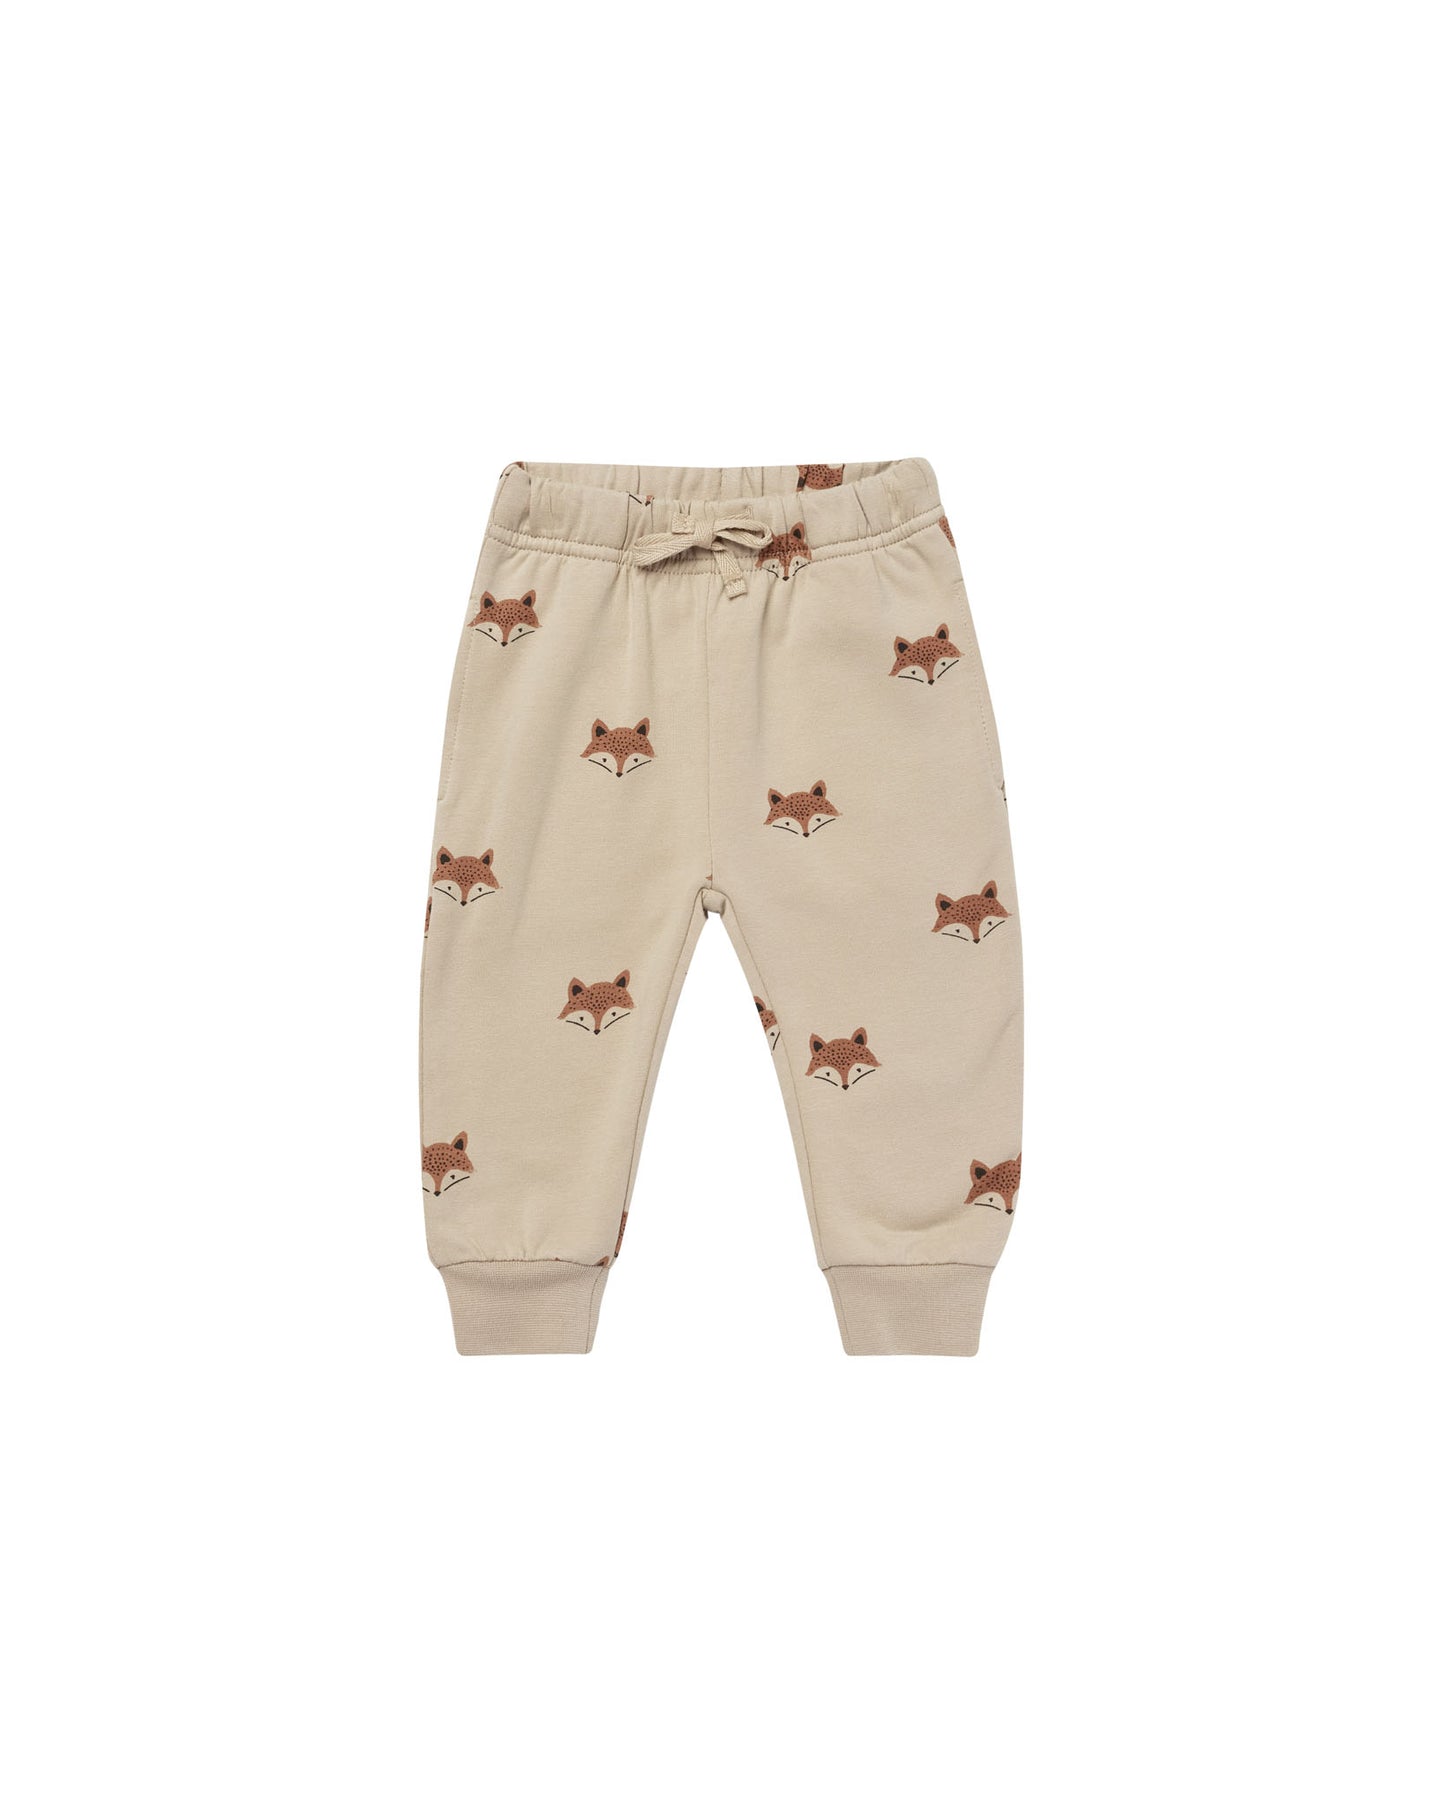 Quincy Mae - Relaxed Fleece Sweatpants - Foxes